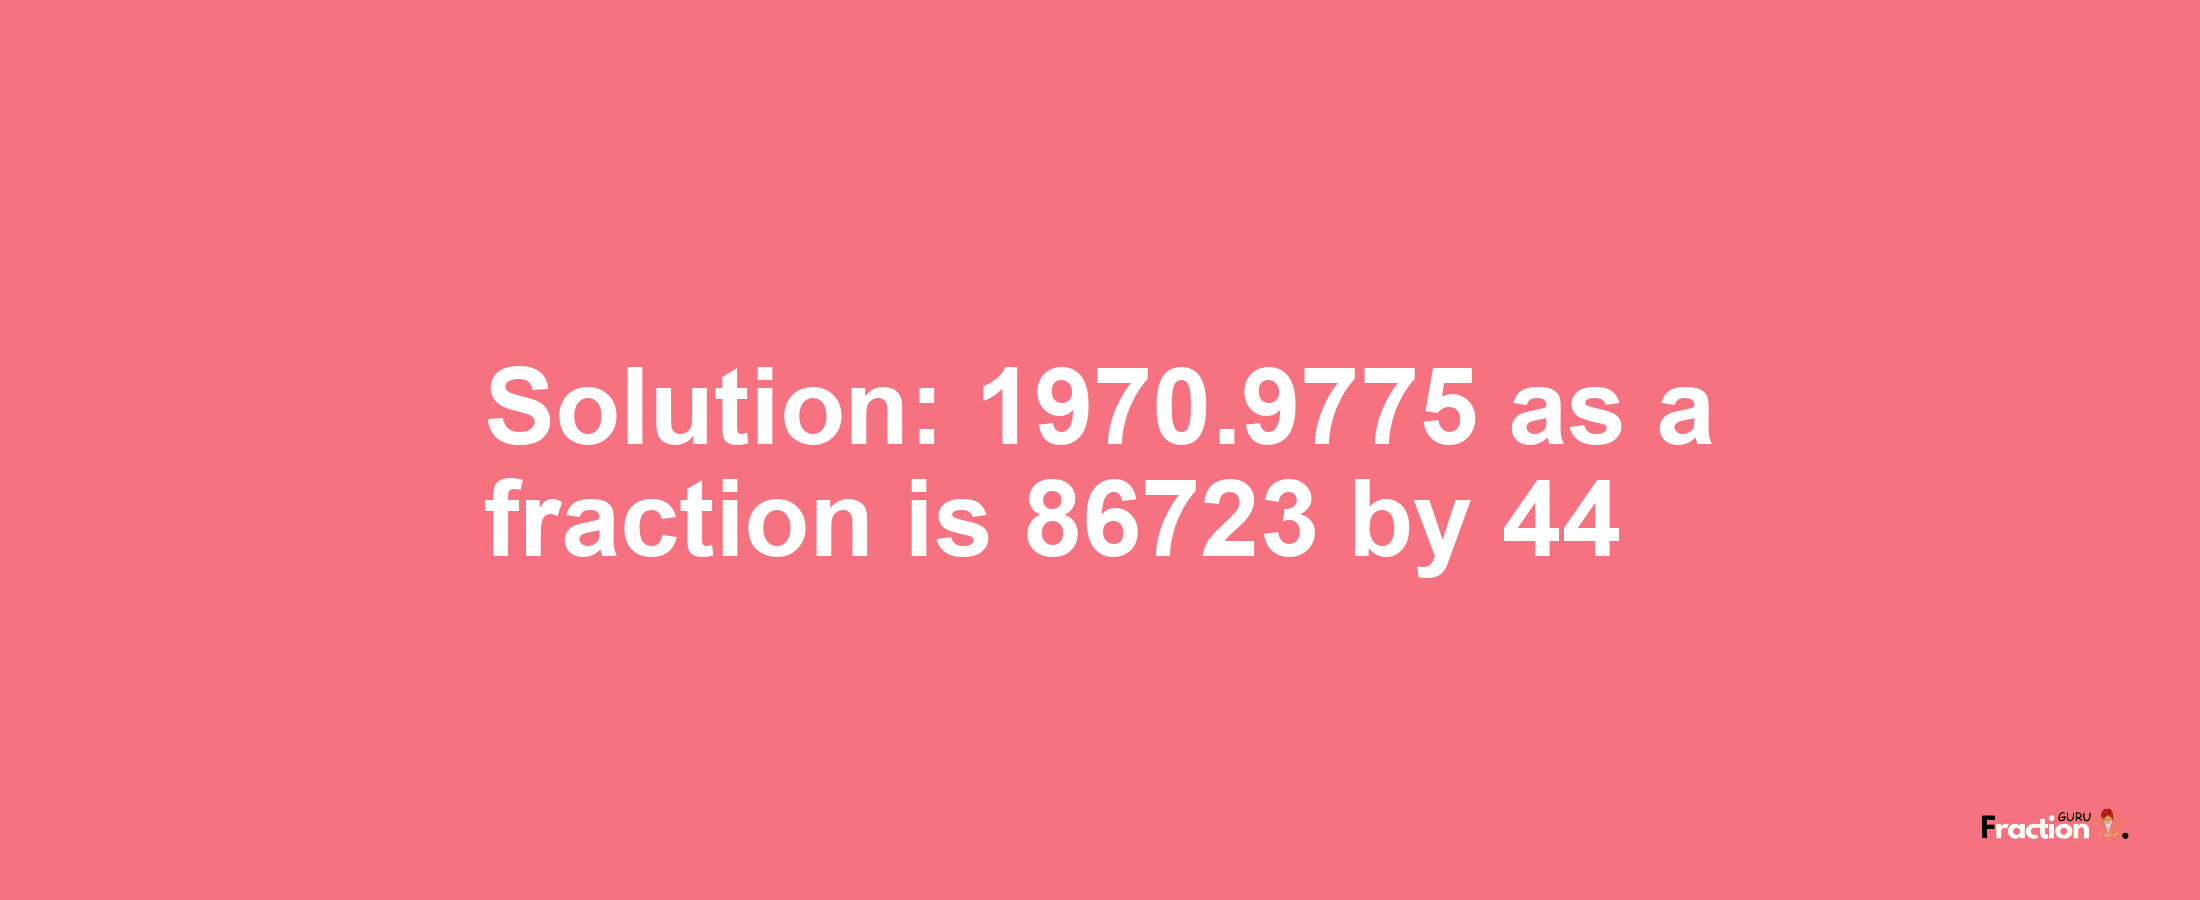 Solution:1970.9775 as a fraction is 86723/44